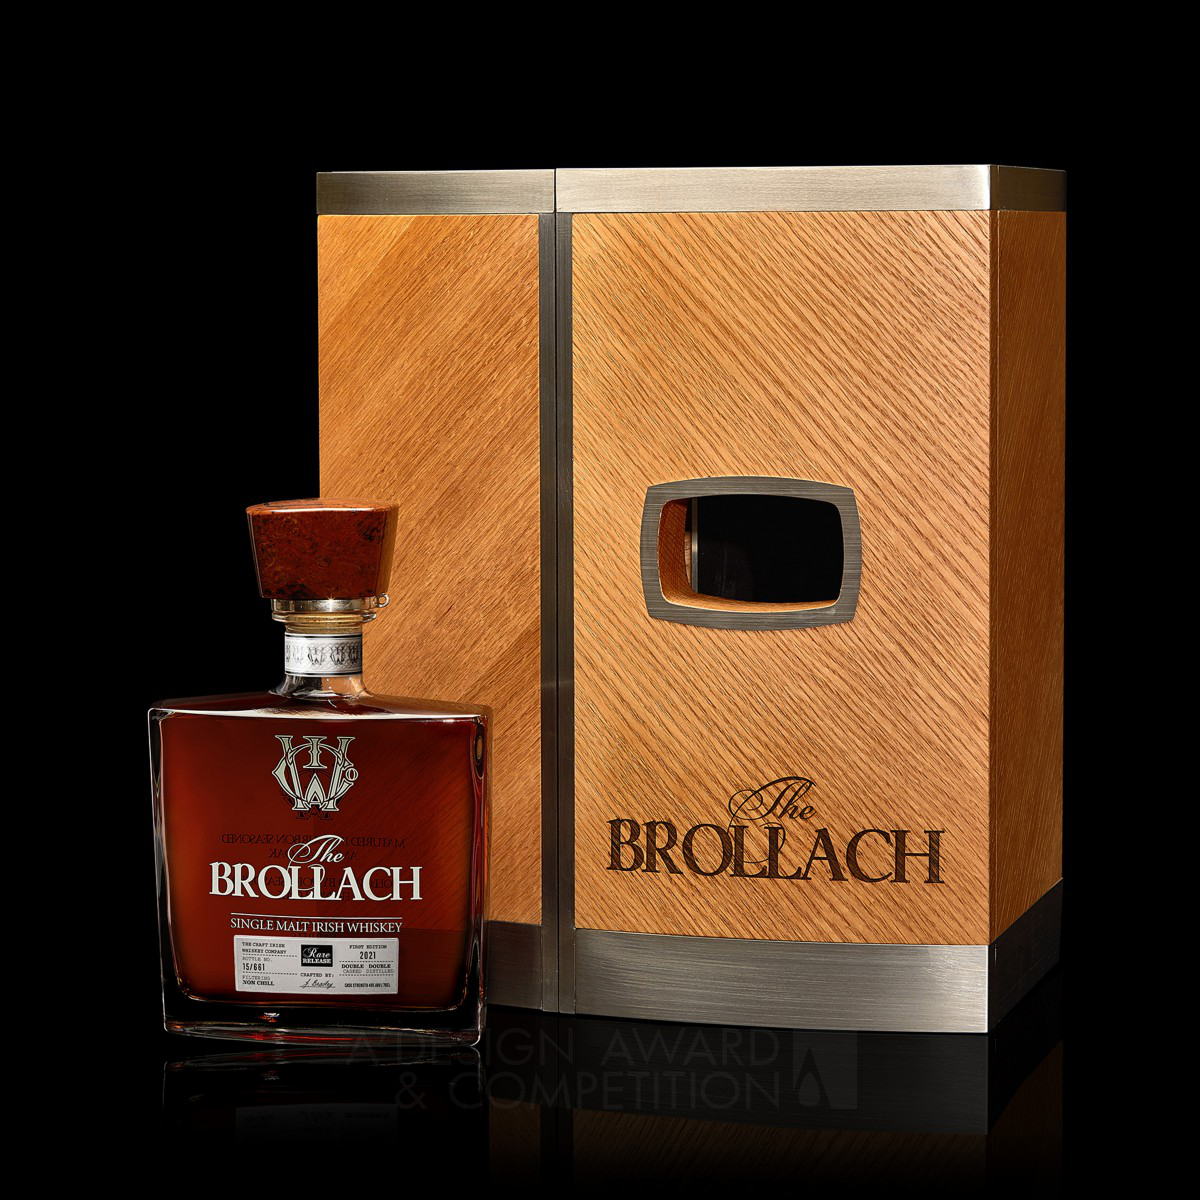 Tiago Russo wins Golden at the prestigious A' Packaging Design Award with The Brollach Single Malt Irish Whiskey.